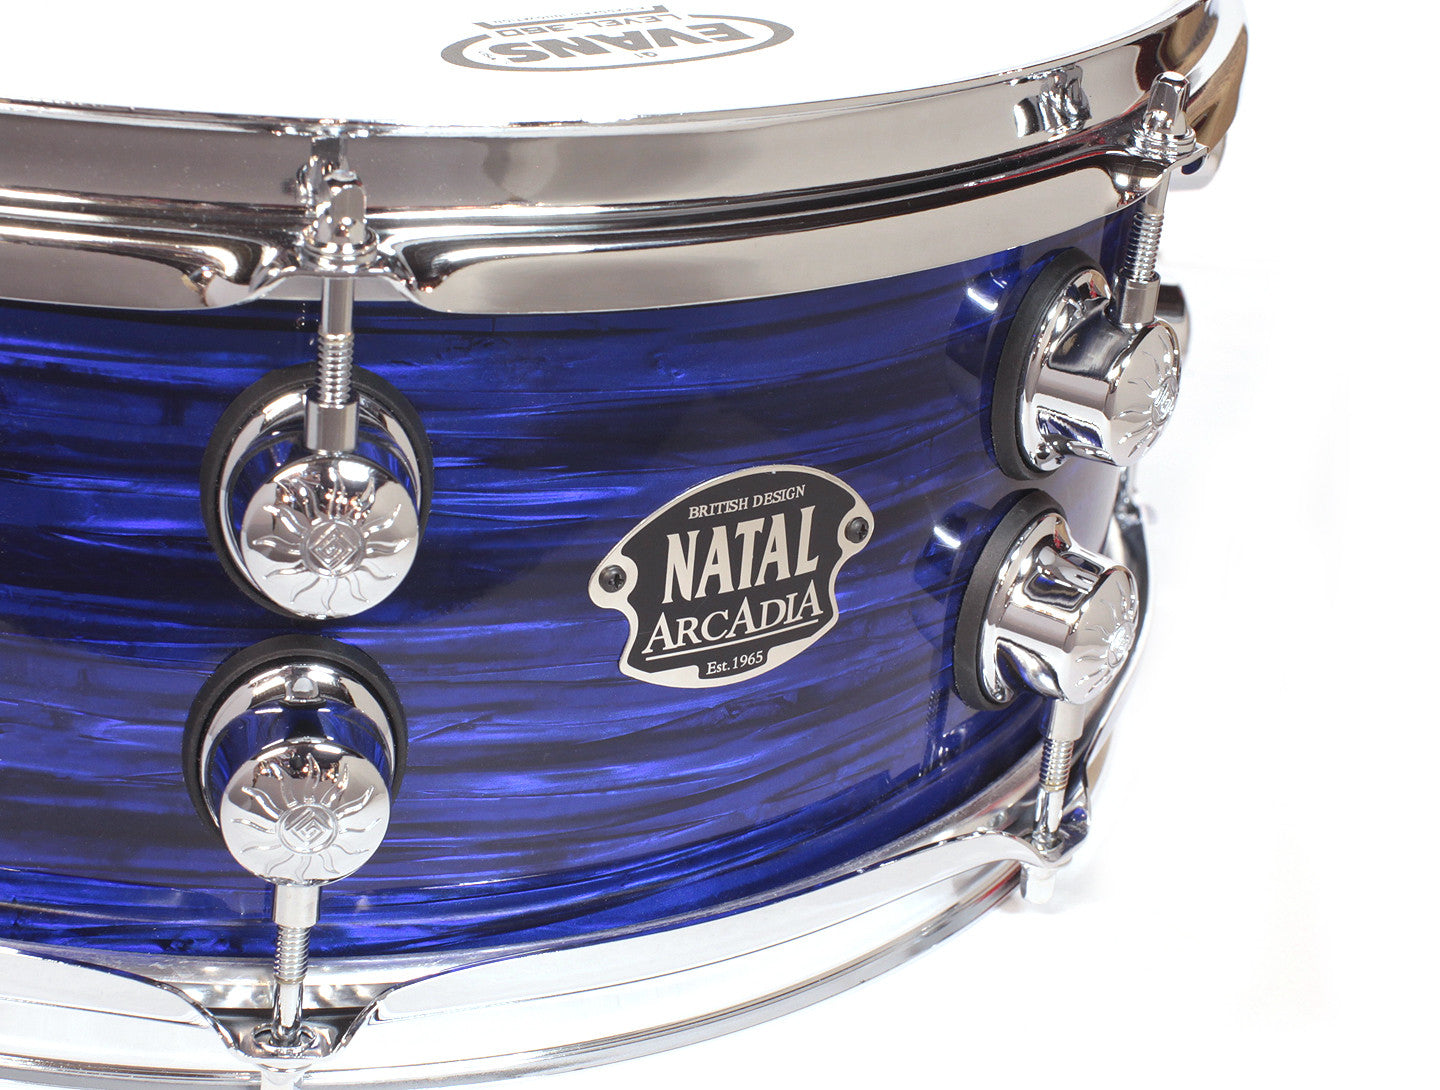 Natal Limited Edition snare drum